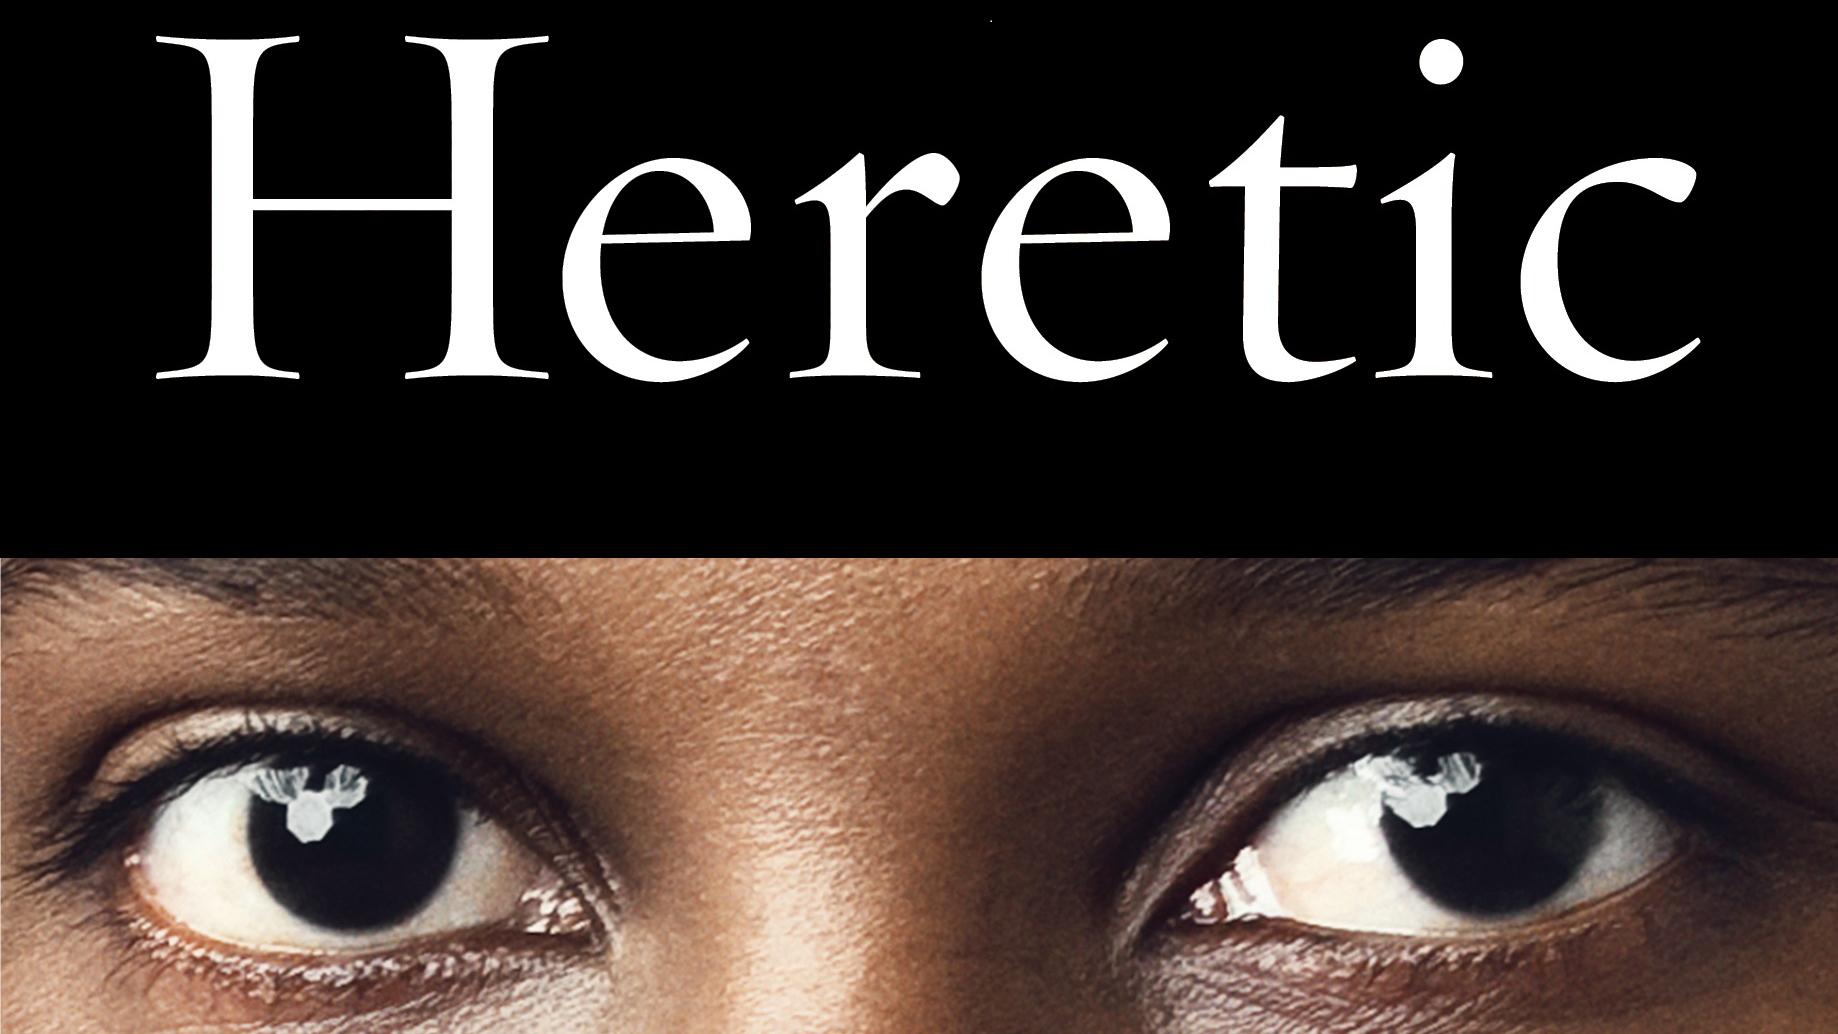 Heretic:  Why Islam Needs a Reformation Now is Ayaan Hirsi Ali's new book.